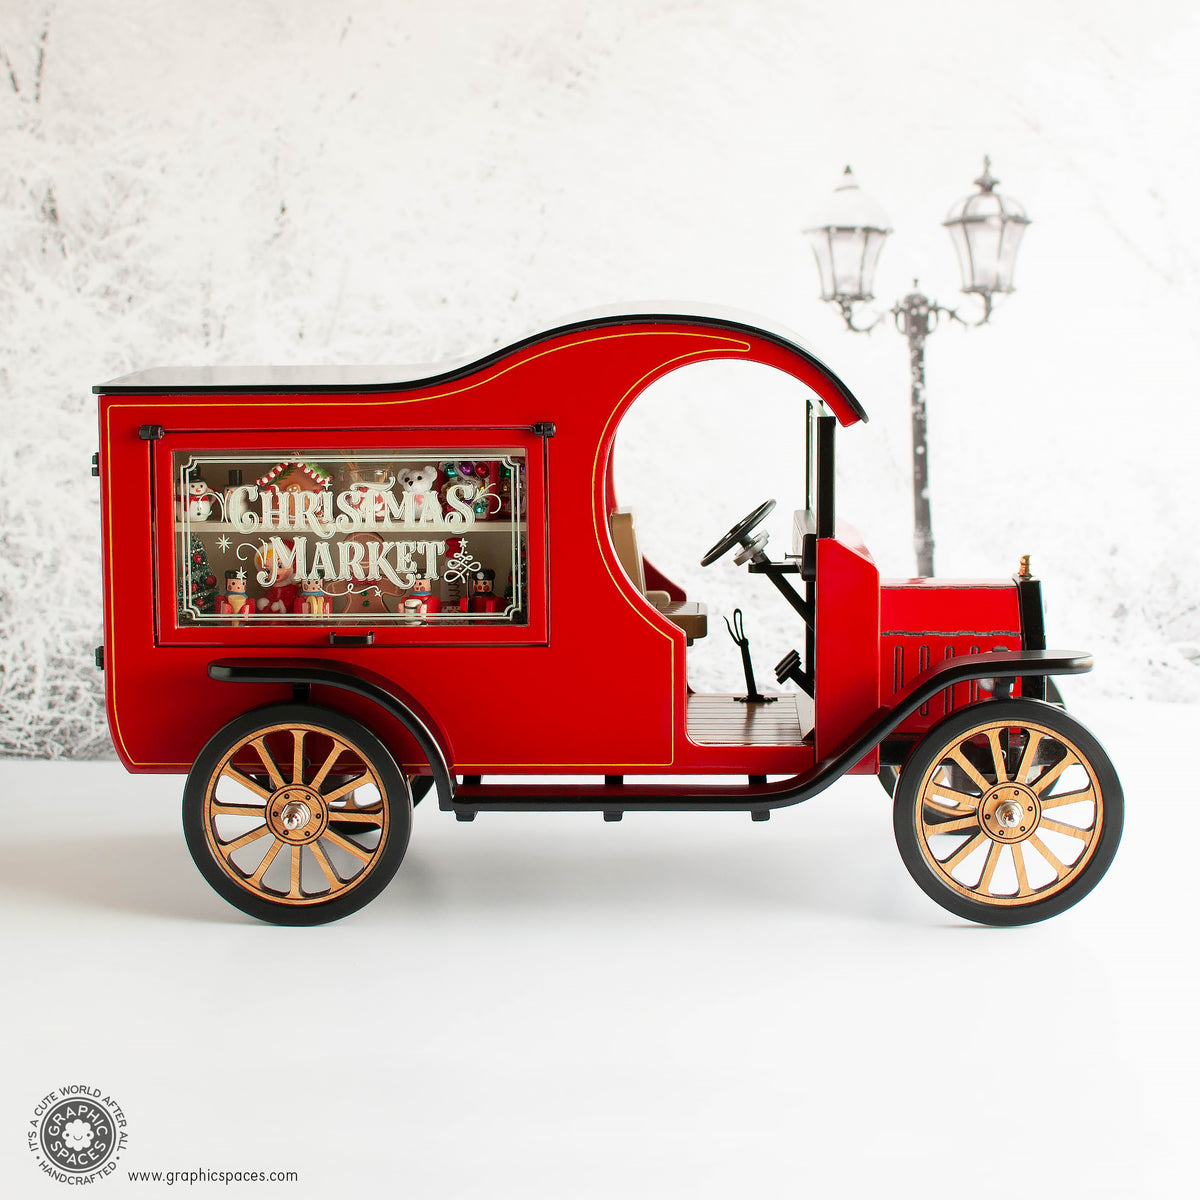 1:12 Scale Room Box Red Christmas Market Truck Model T C Cab. Full Passenger side view. Display window closed.